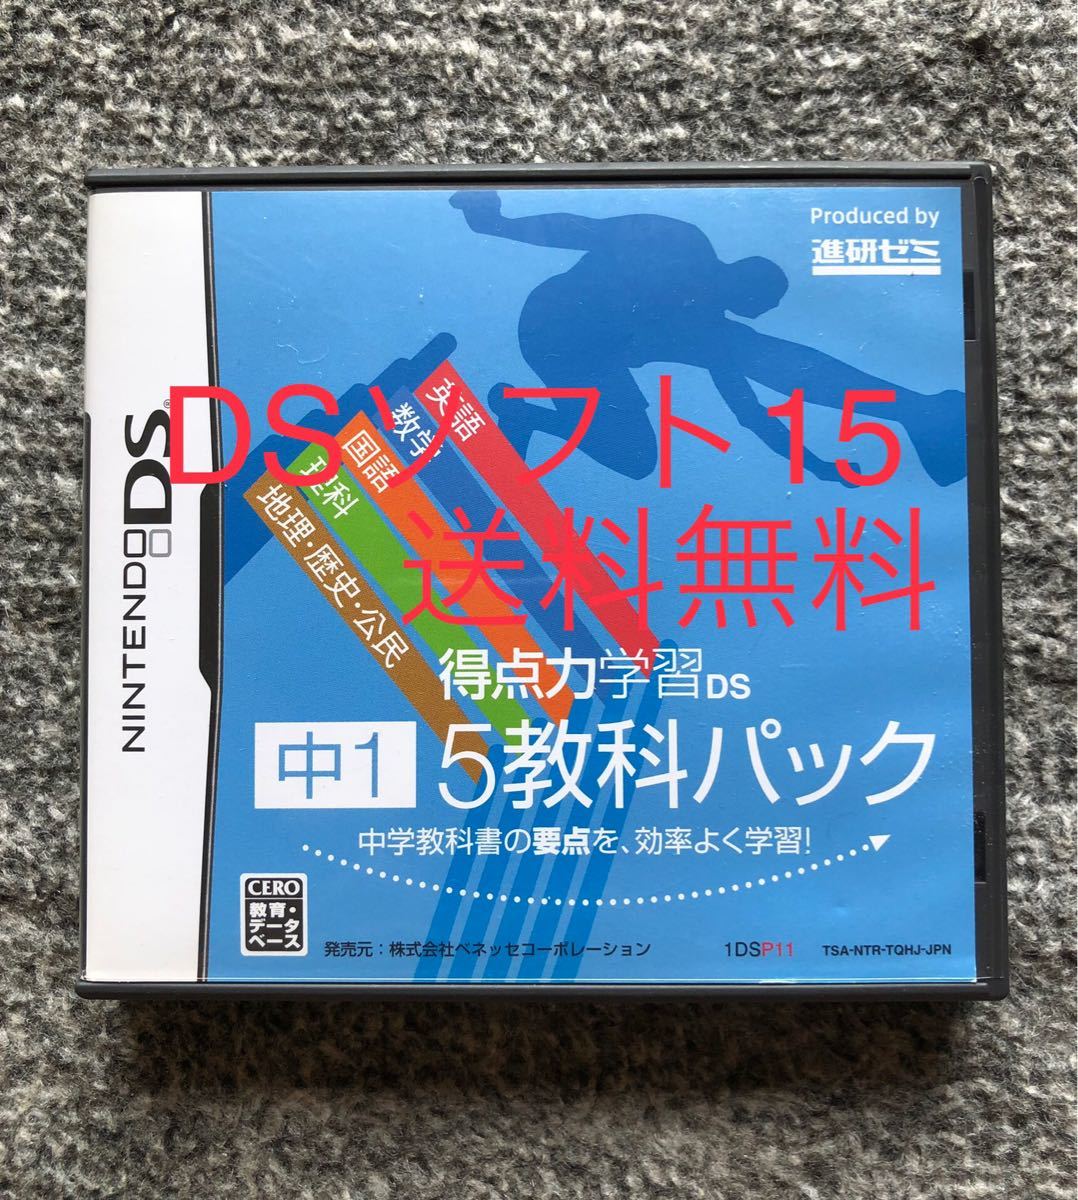 DS 15 中古ソフト